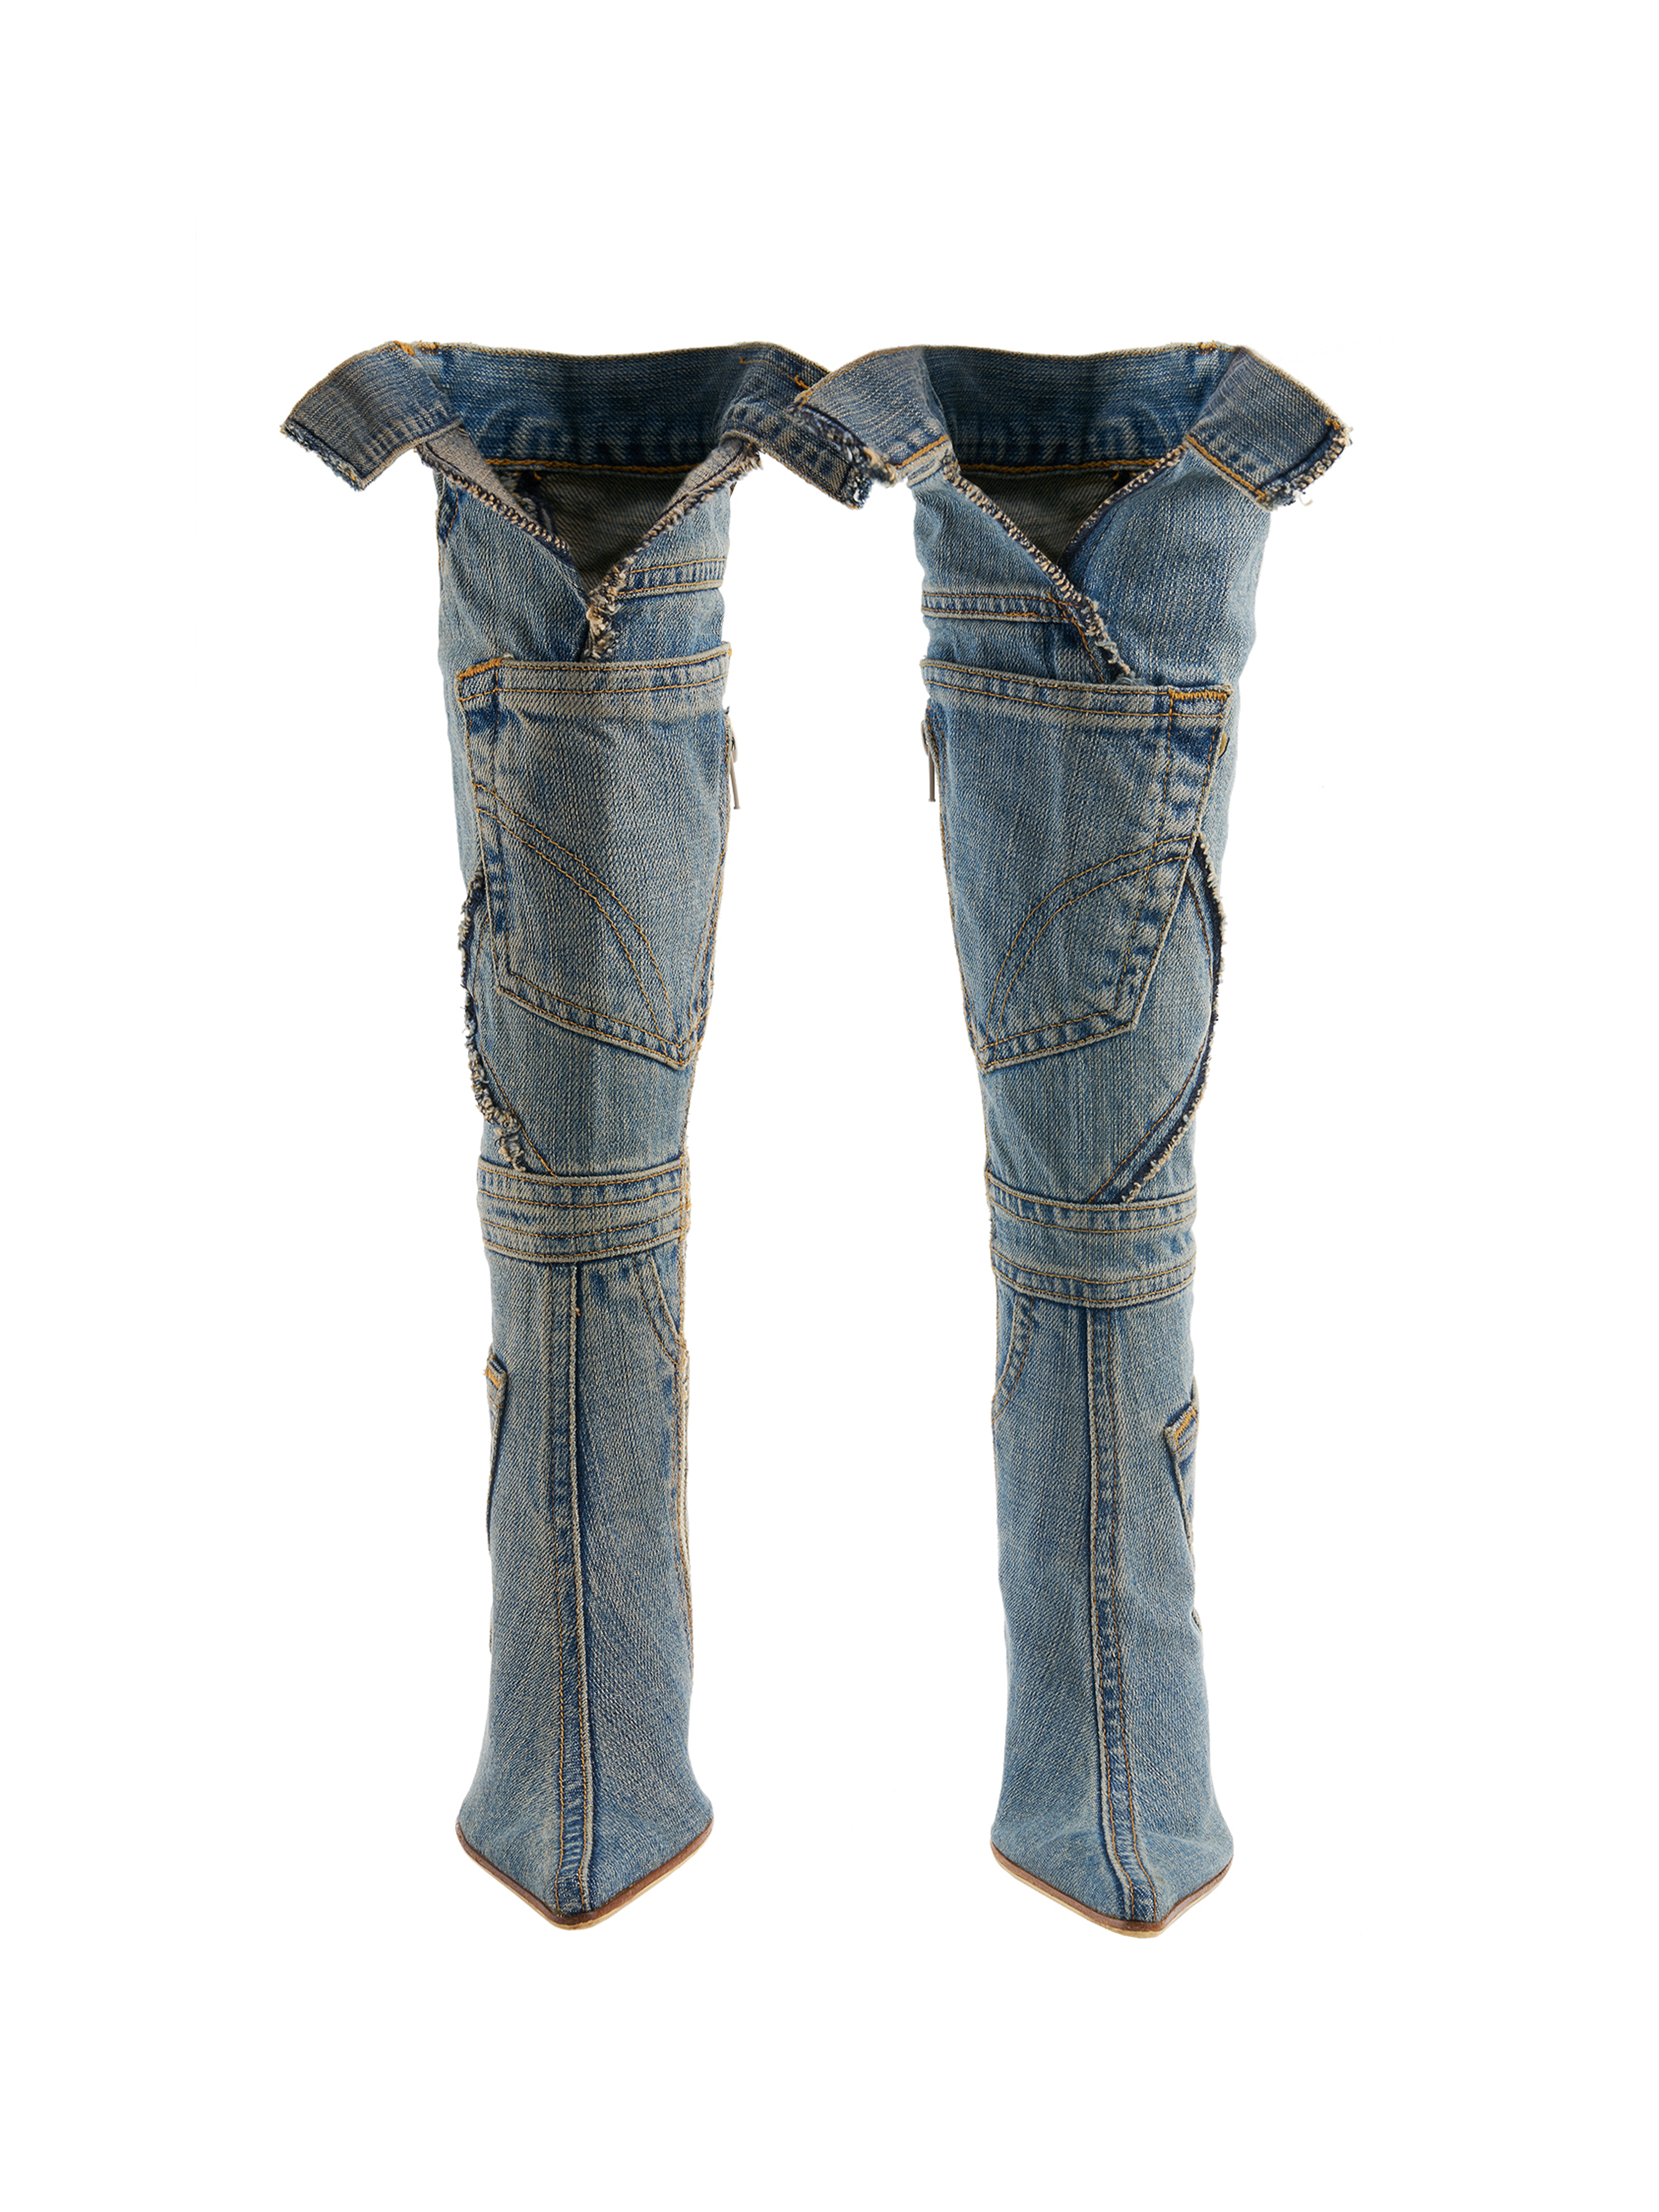 Dolce and Gabbana Early 2000s Distressed Denim Knee-high Pointy-toe Boots